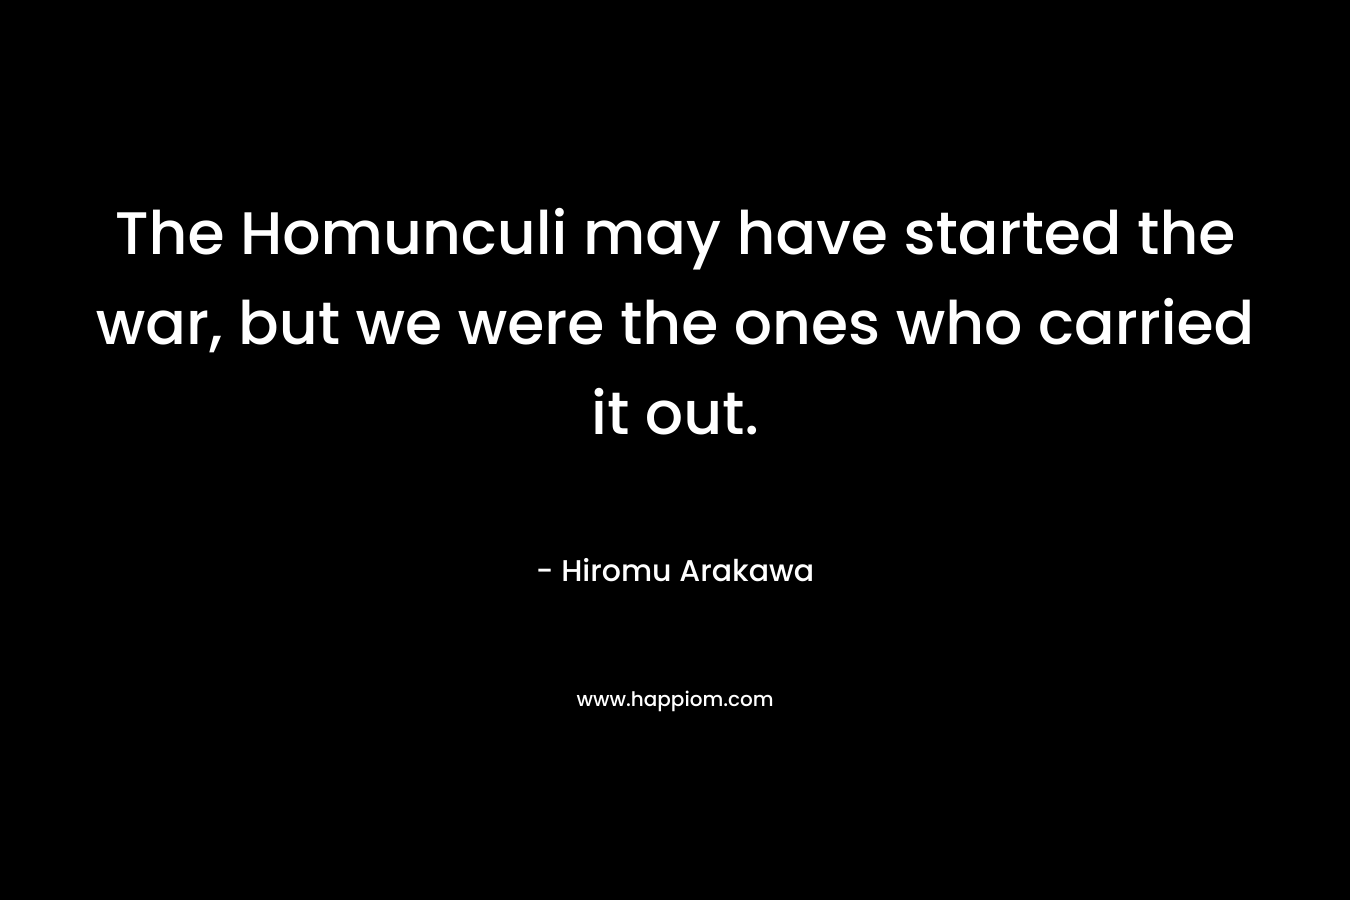 The Homunculi may have started the war, but we were the ones who carried it out. – Hiromu Arakawa